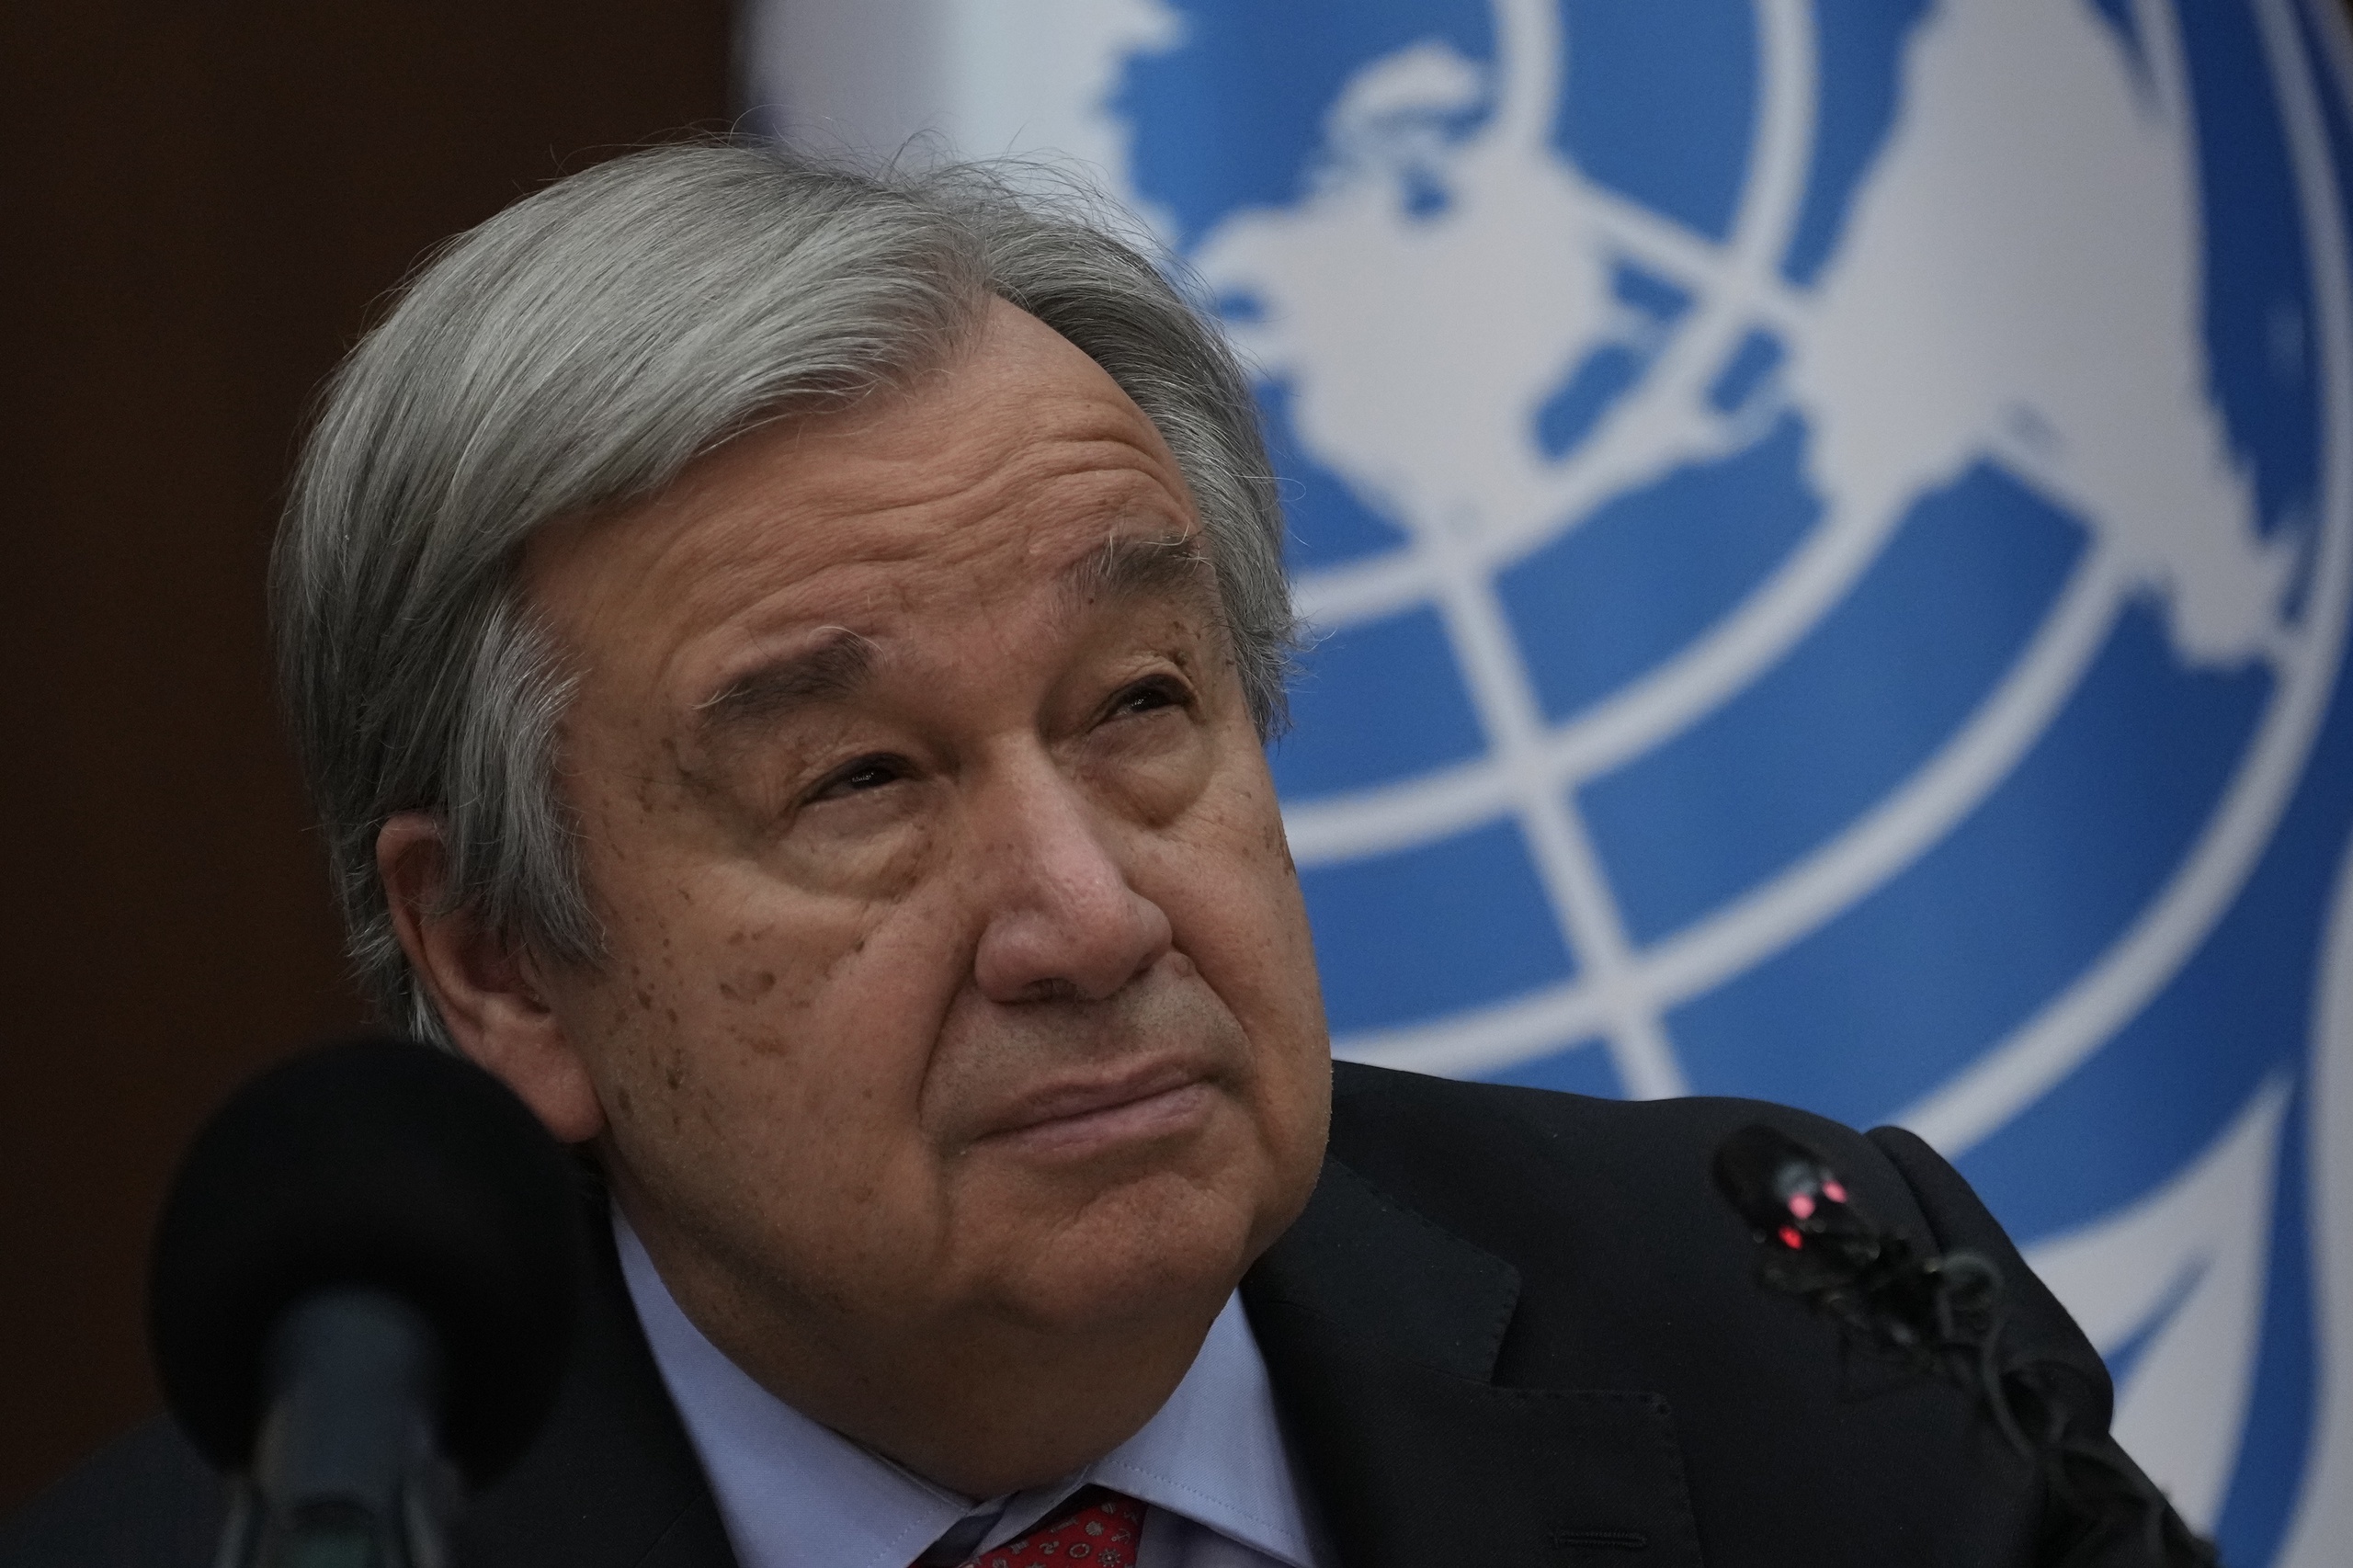 UN chief Guterres lashes out at energy companies